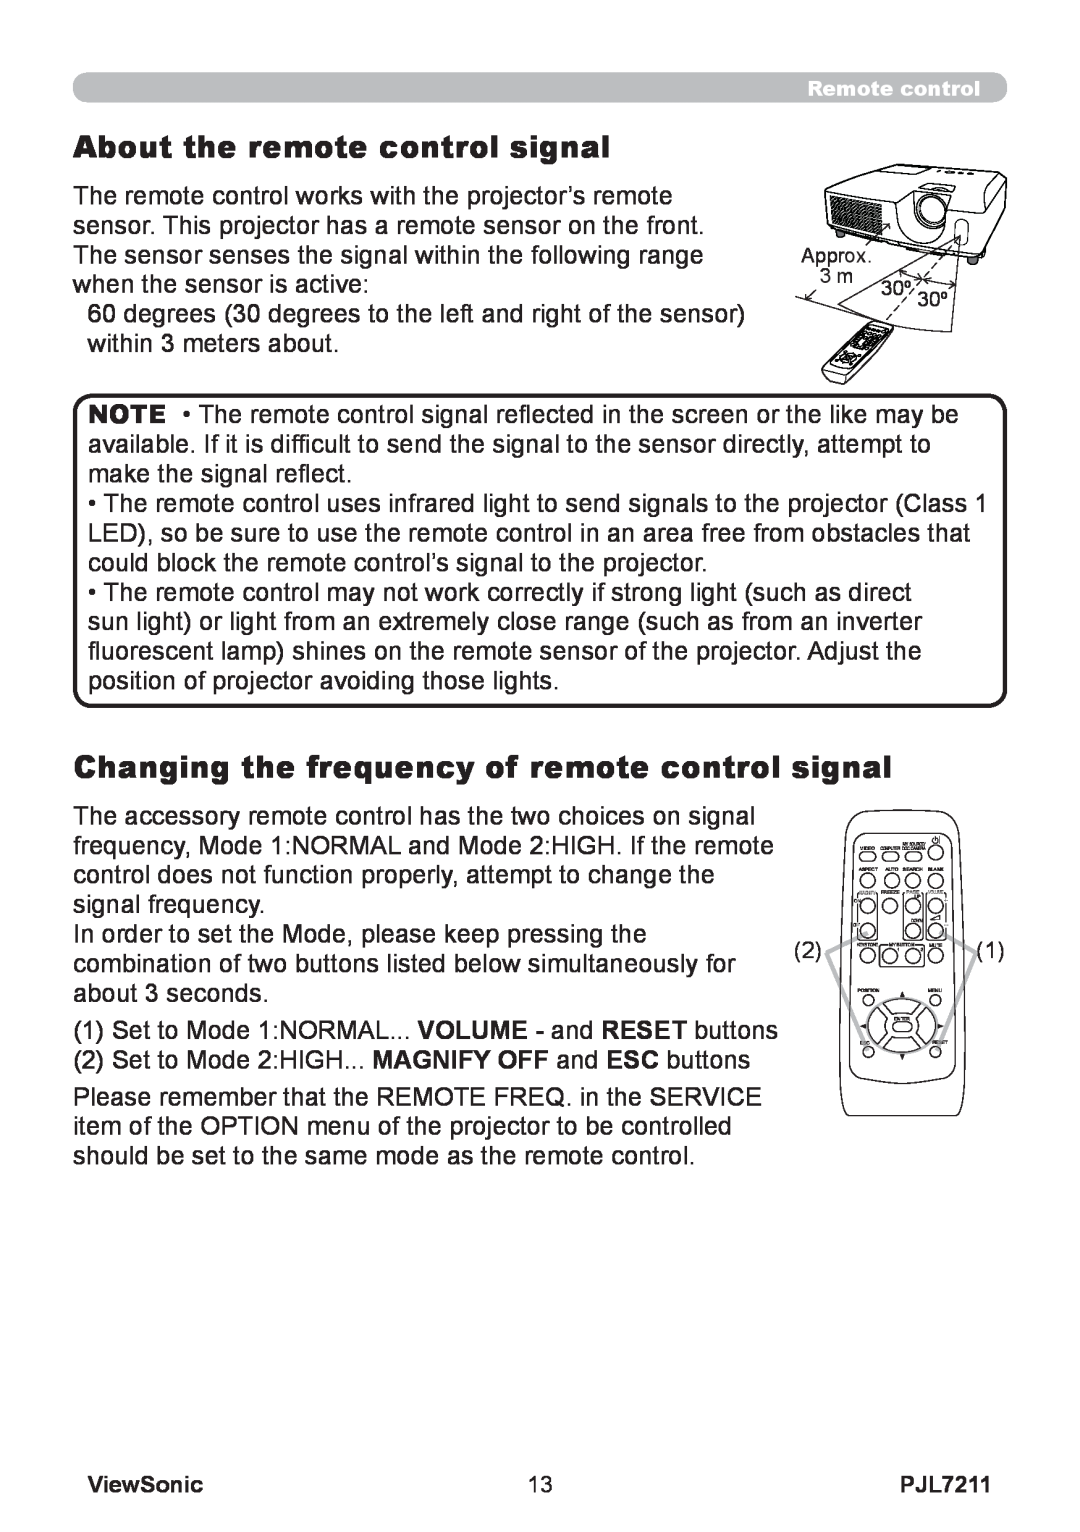 ViewSonic PJL7211 manual About the remote control signal, Changing the frequency of remote control signal 